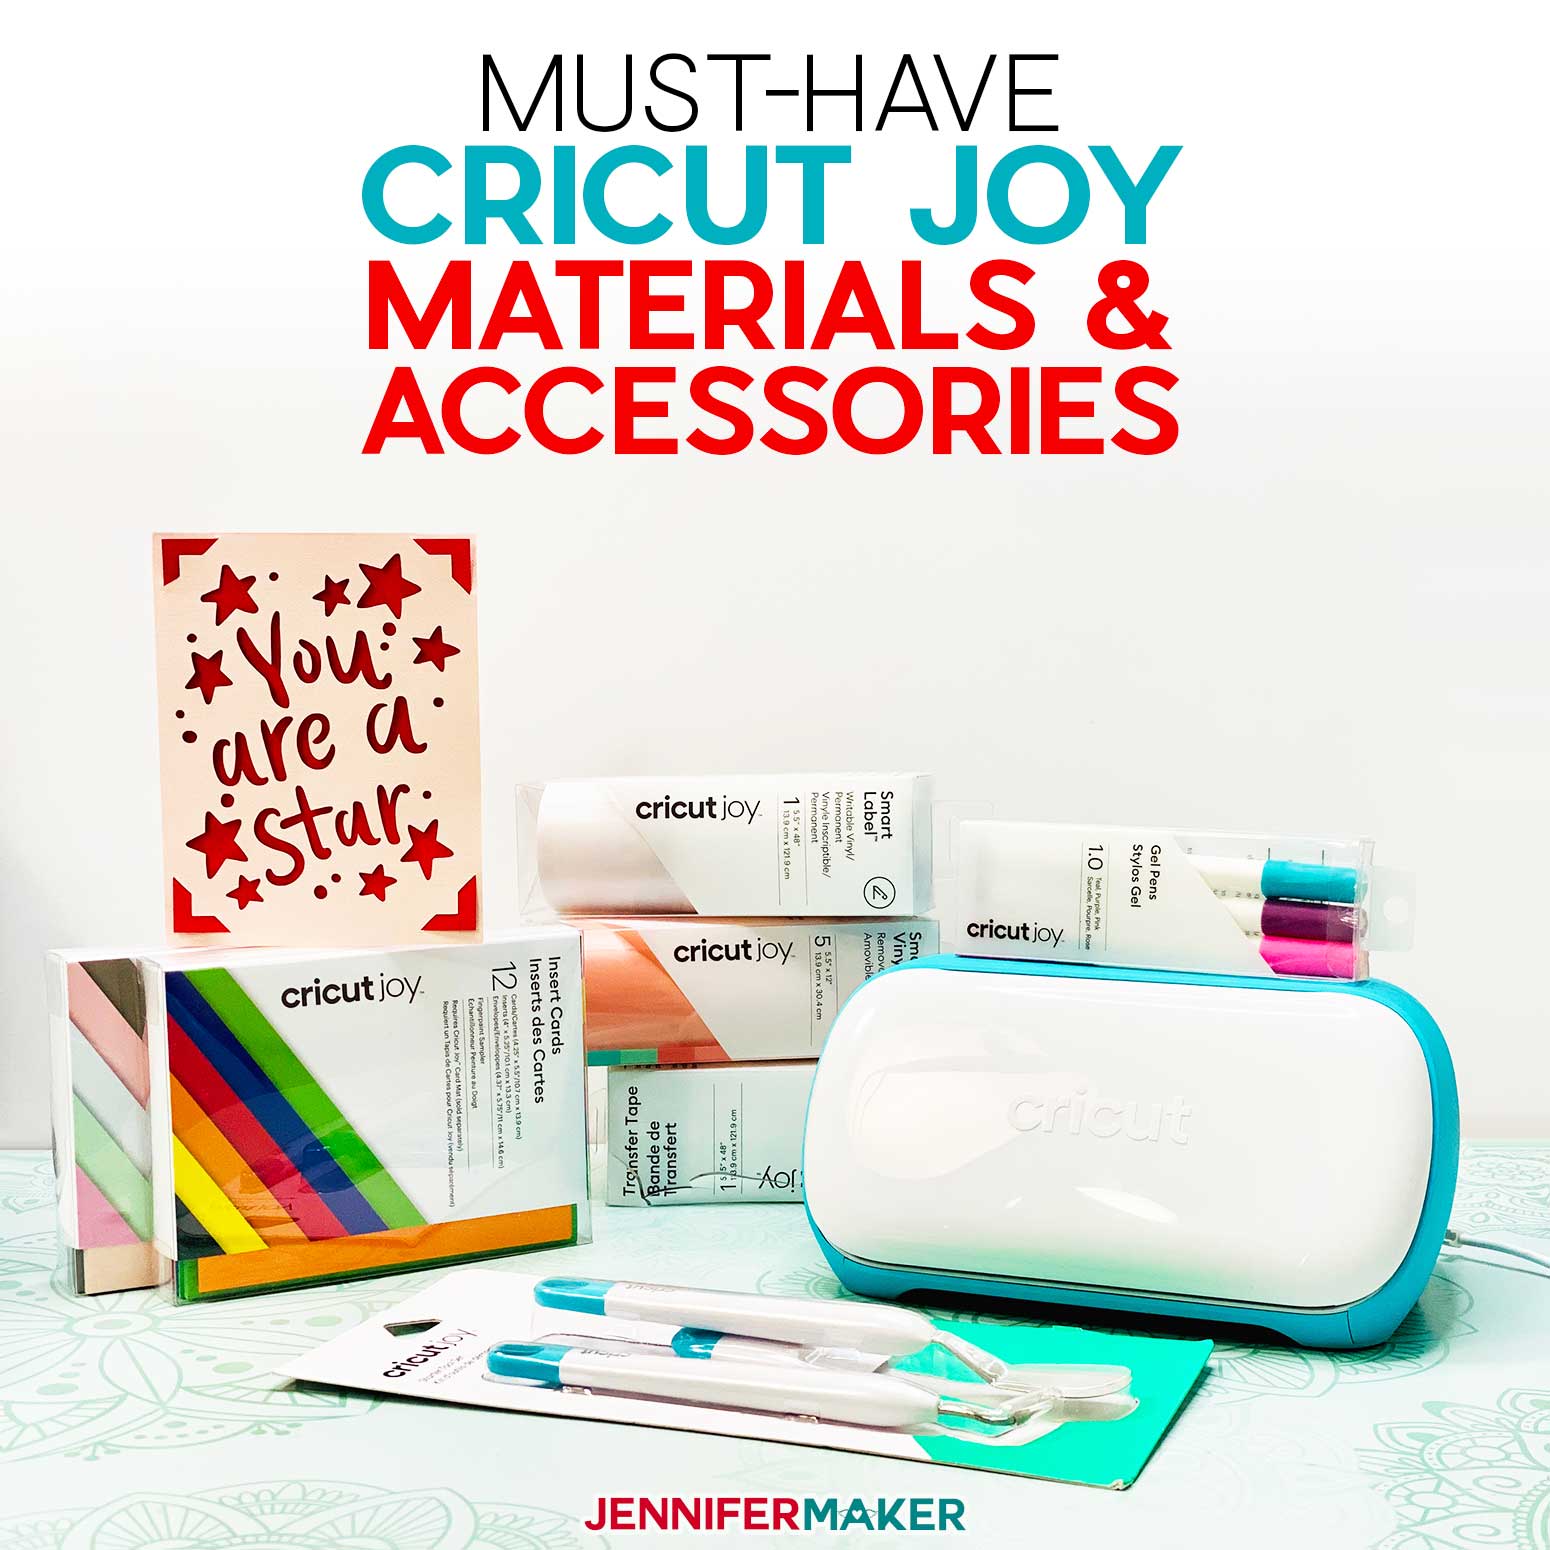 Cricut Joy: What Materials & Accessories Do You REALLY Need?